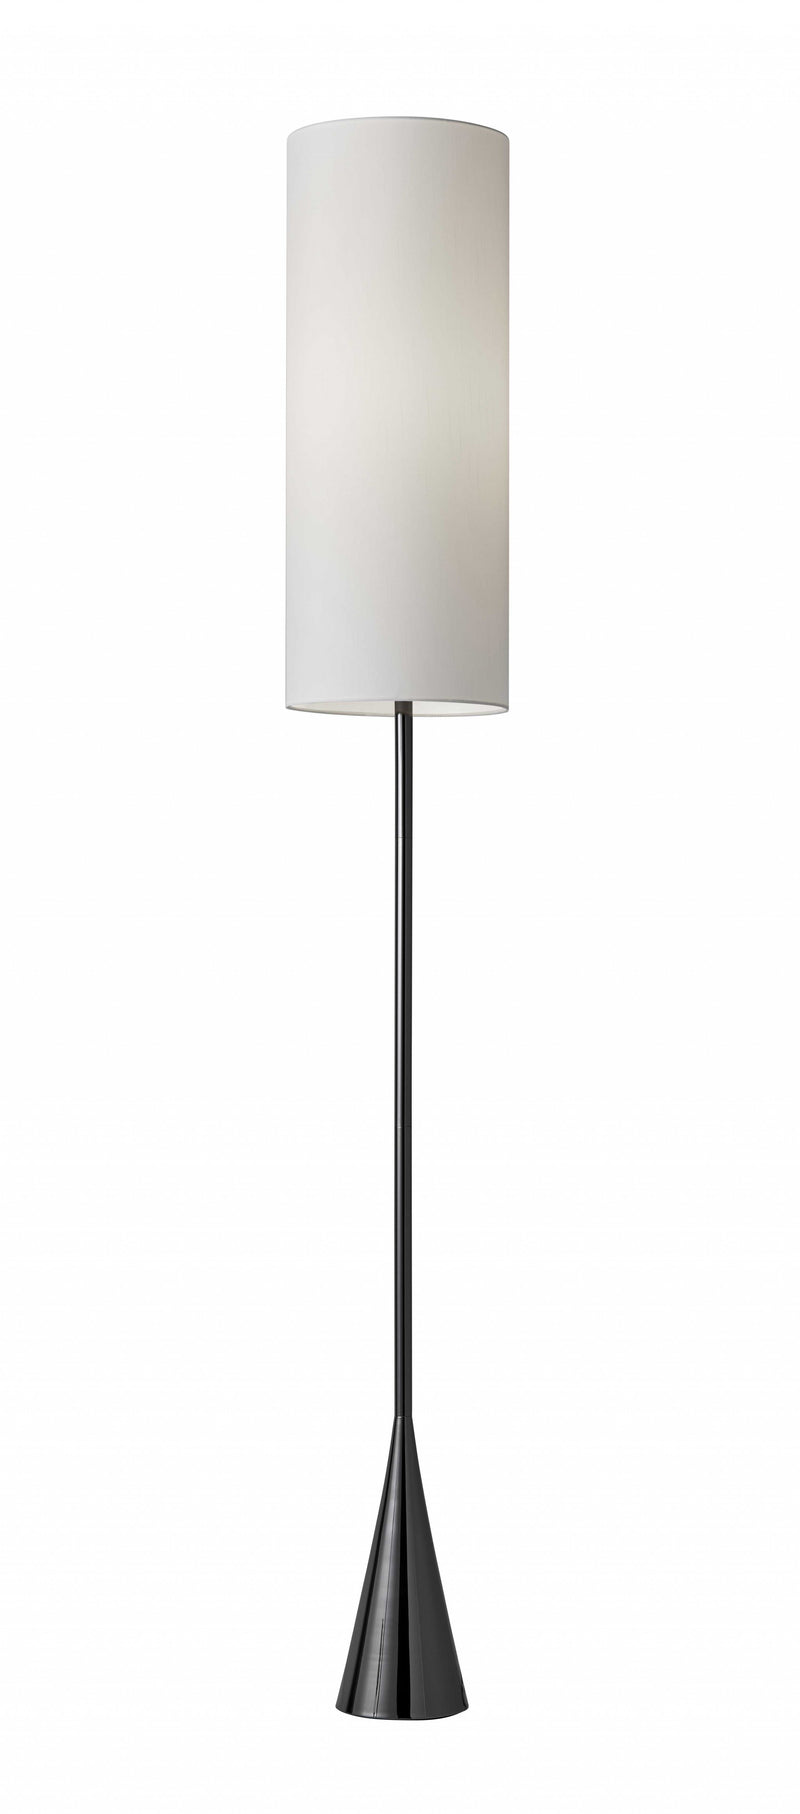 Home Outfitters Dramatic Floor Lamp Bell Shaped Base In Black Nickel Finish Metal